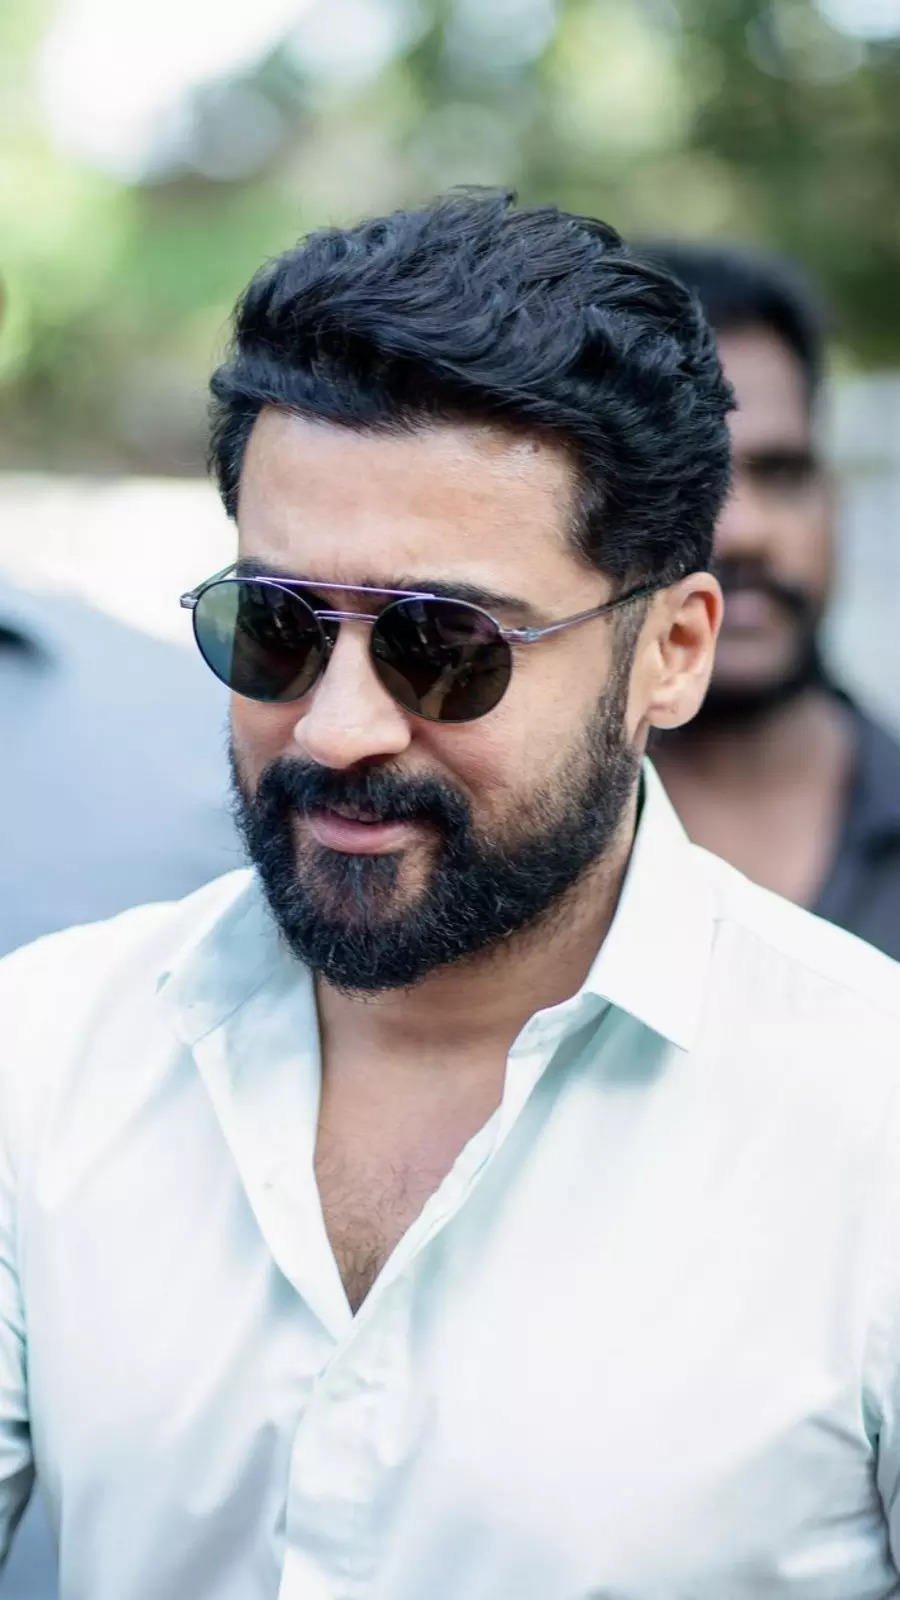 Kaappaans surprise gift for Tamil New Year  News  IndiaGlitzcom